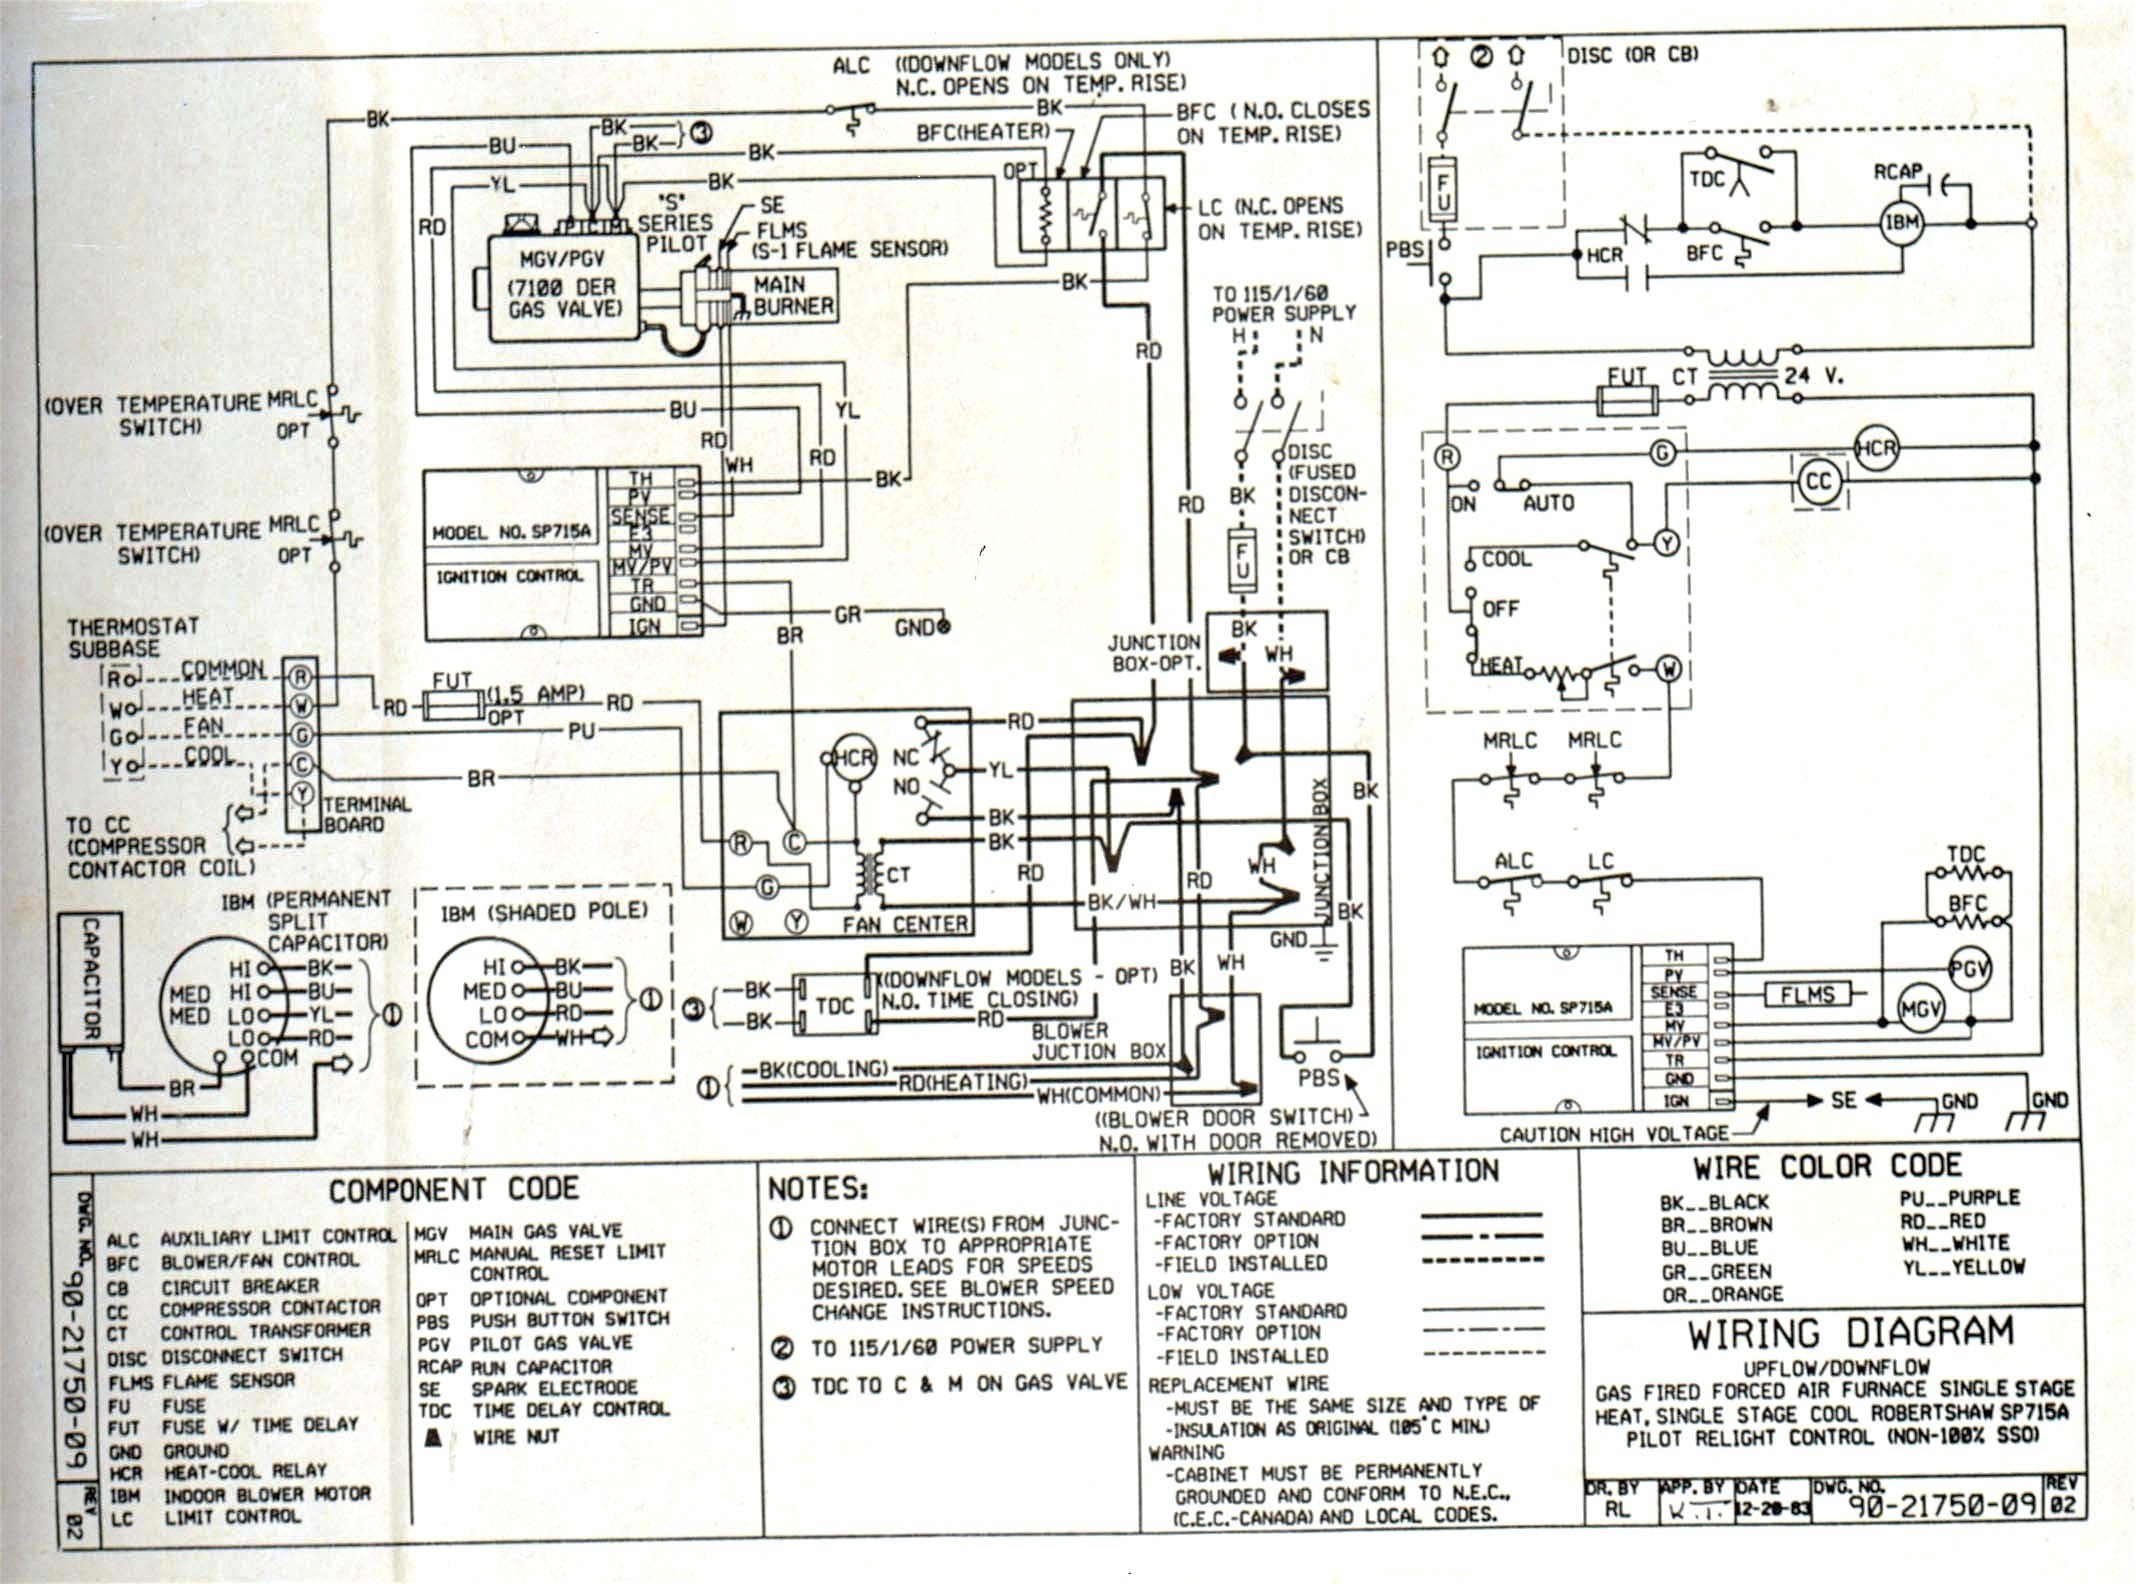 Wiring Diagram Honda Beat Pdf New Wiring Diagram for Air Conditioning Unit Best Mcquay Air Conditioner